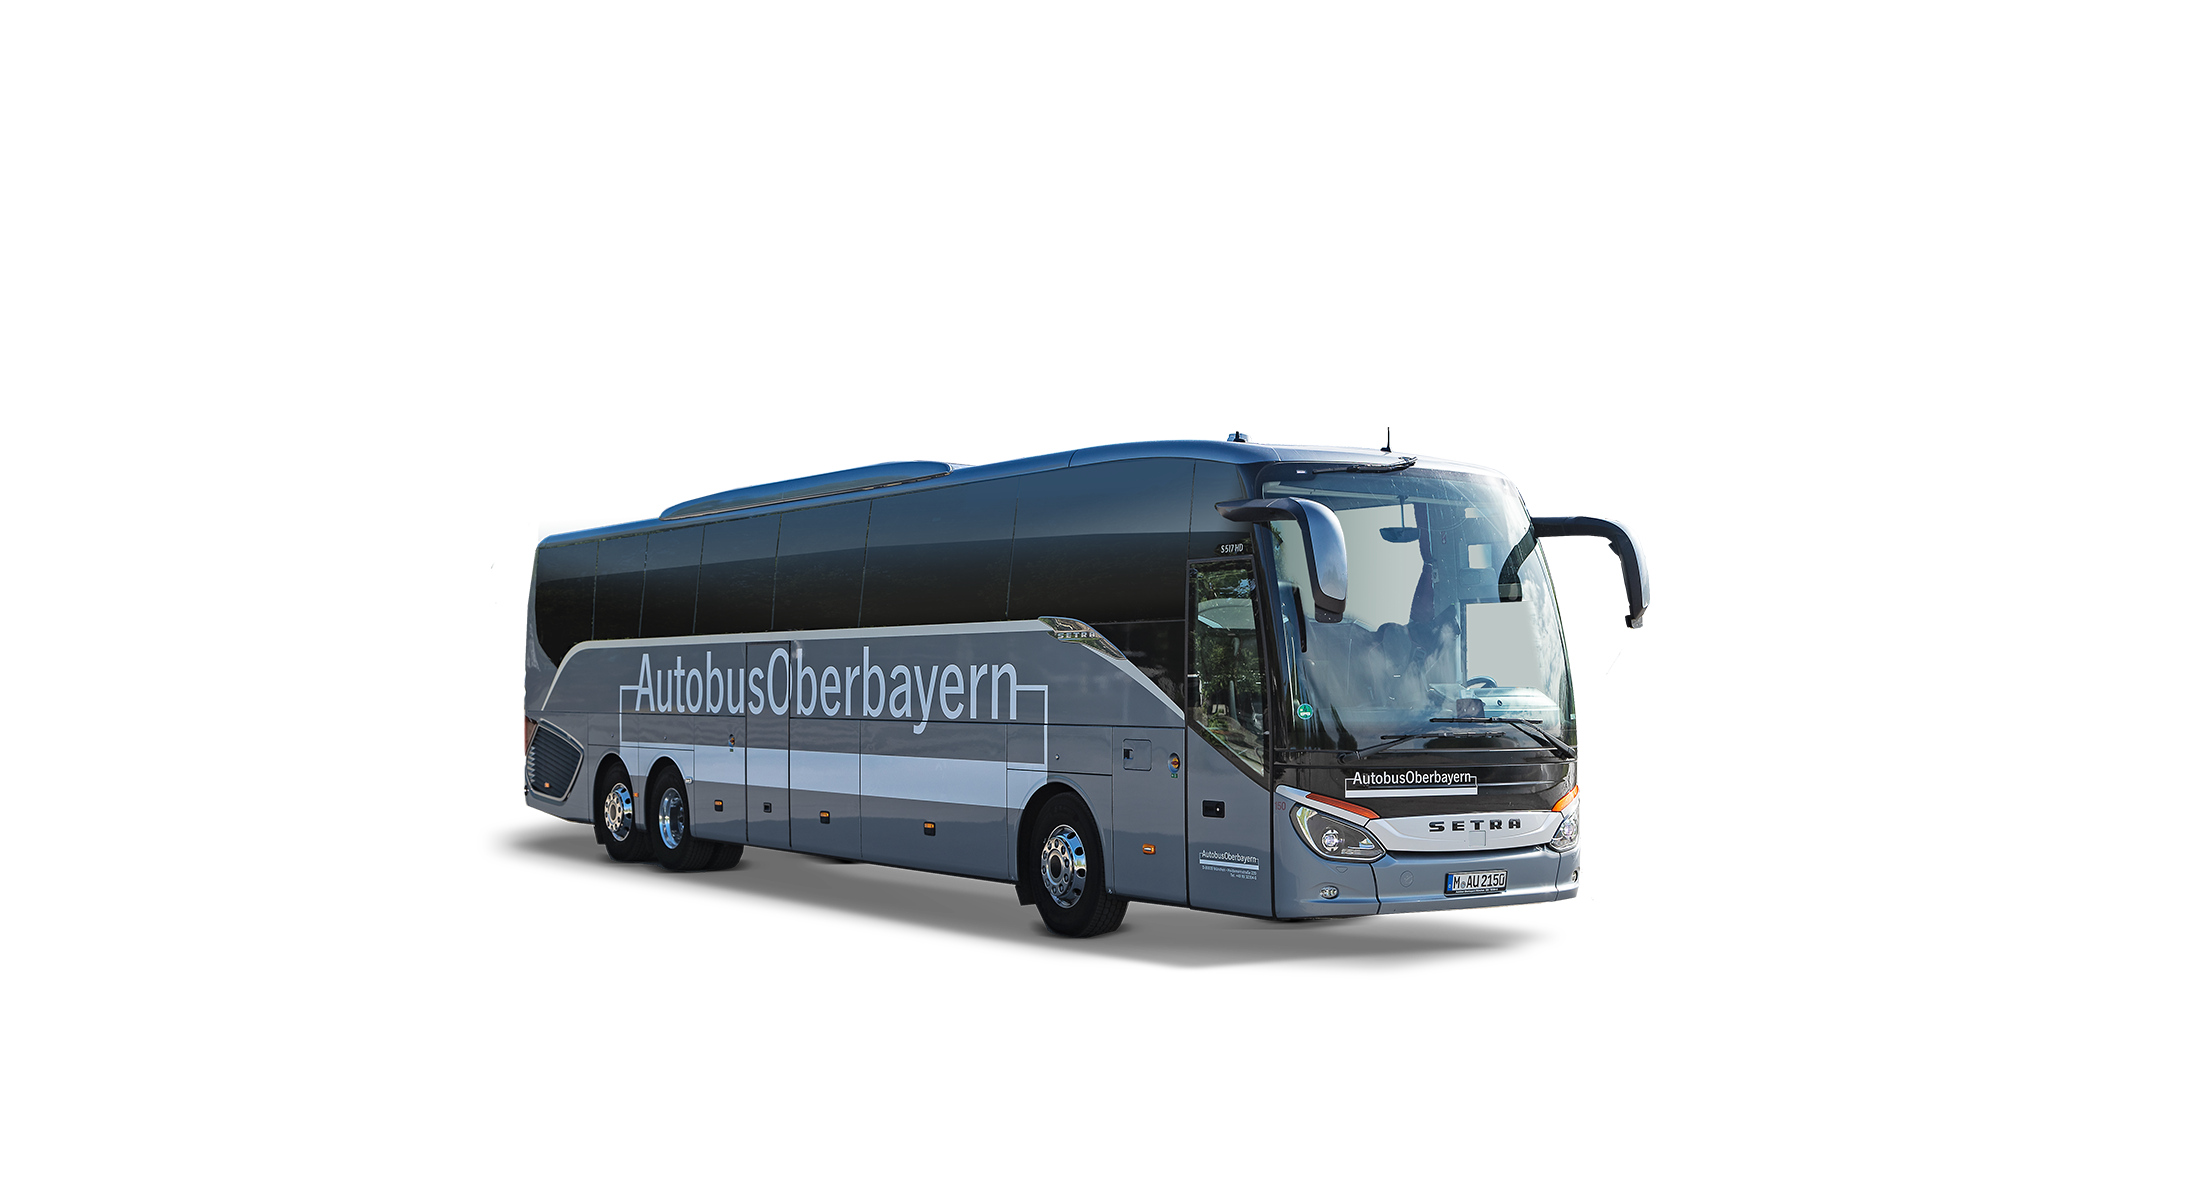 Coach Hire | The Vehicles of Autobus Oberbayern